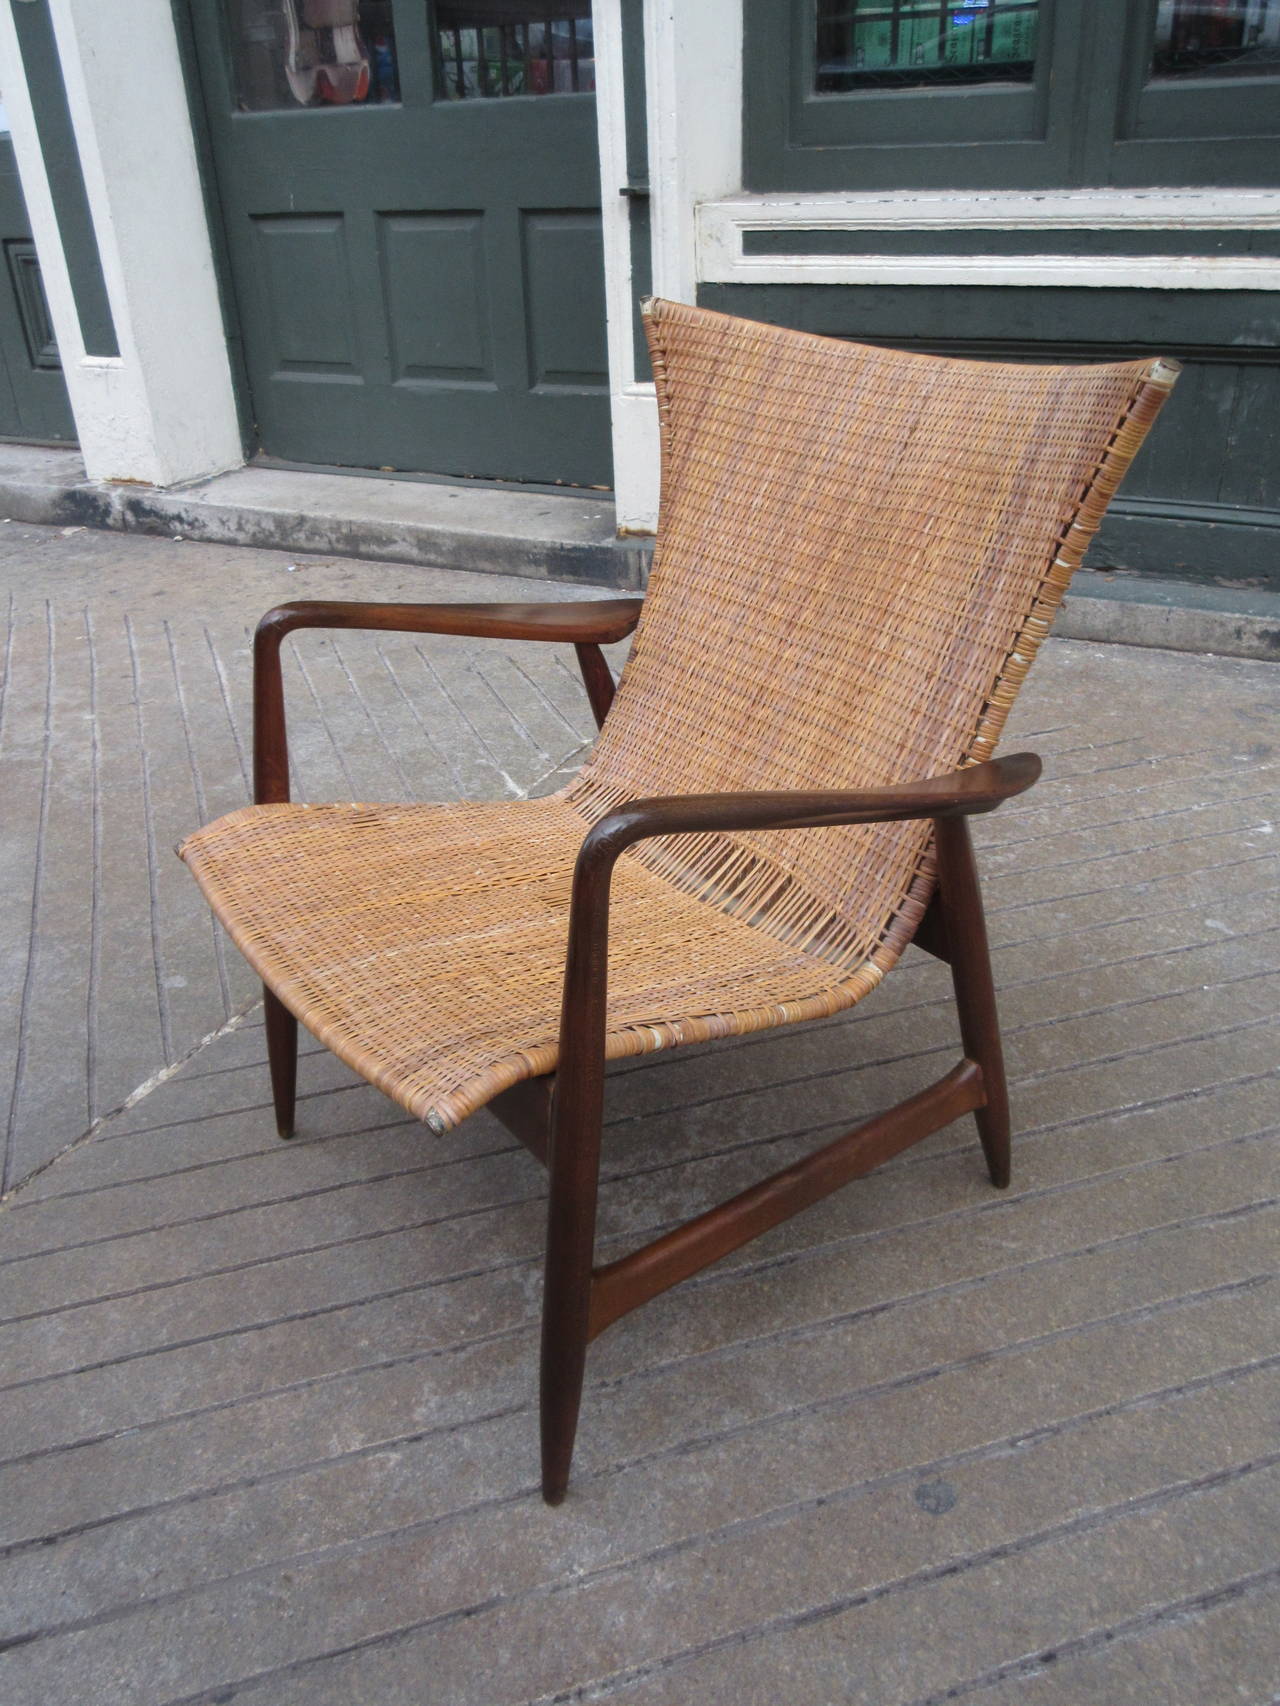 Interesting walnut framed chair with brass caps and steel tubing stretched with woven caning with exaggerated winged back. Chairs uses slot construction typical of the period.